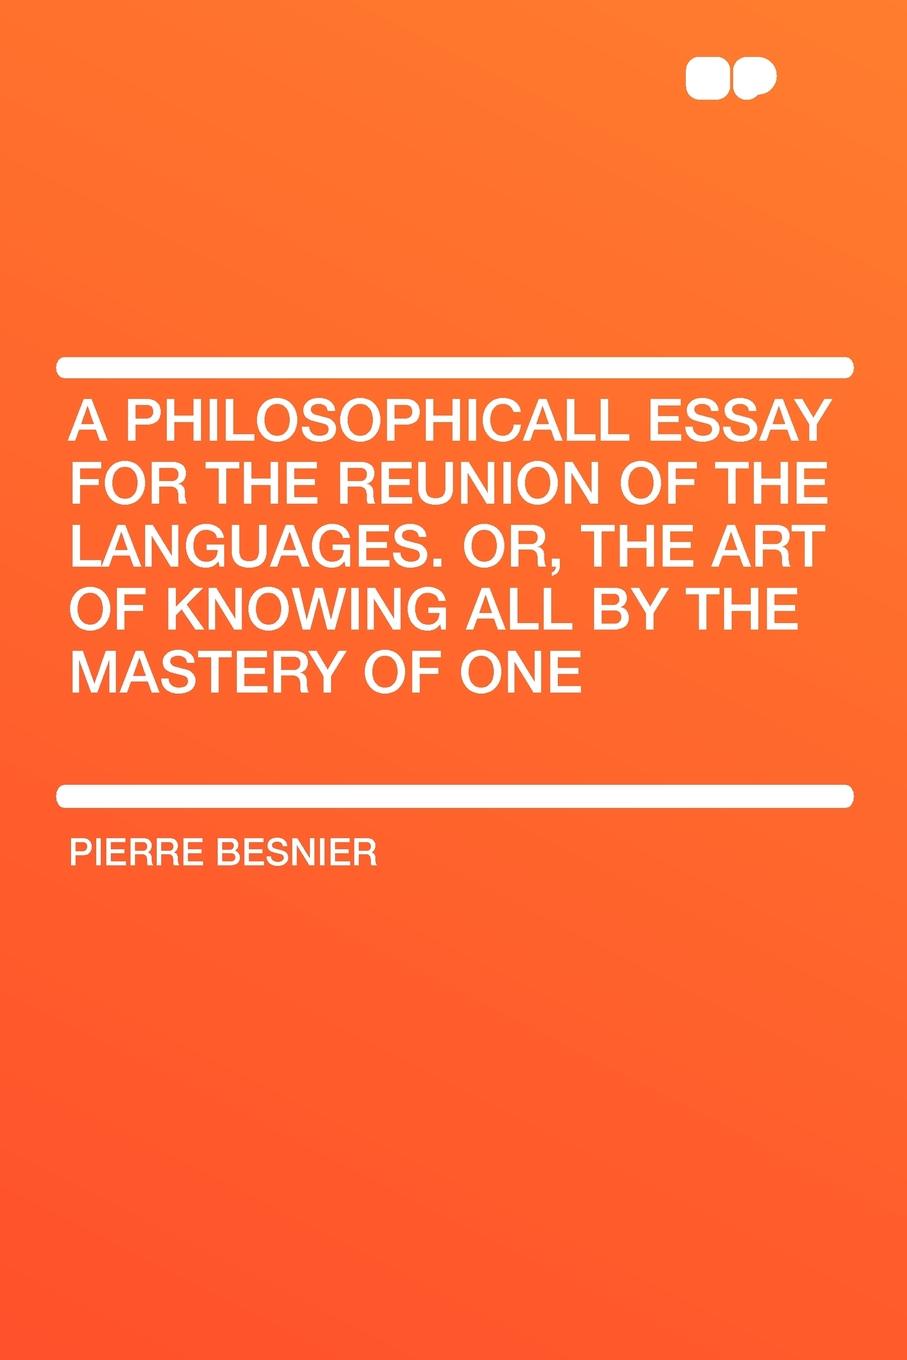 A Philosophicall Essay for the Reunion of the Languages. Or, The Art of Knowing All by the Mastery of One